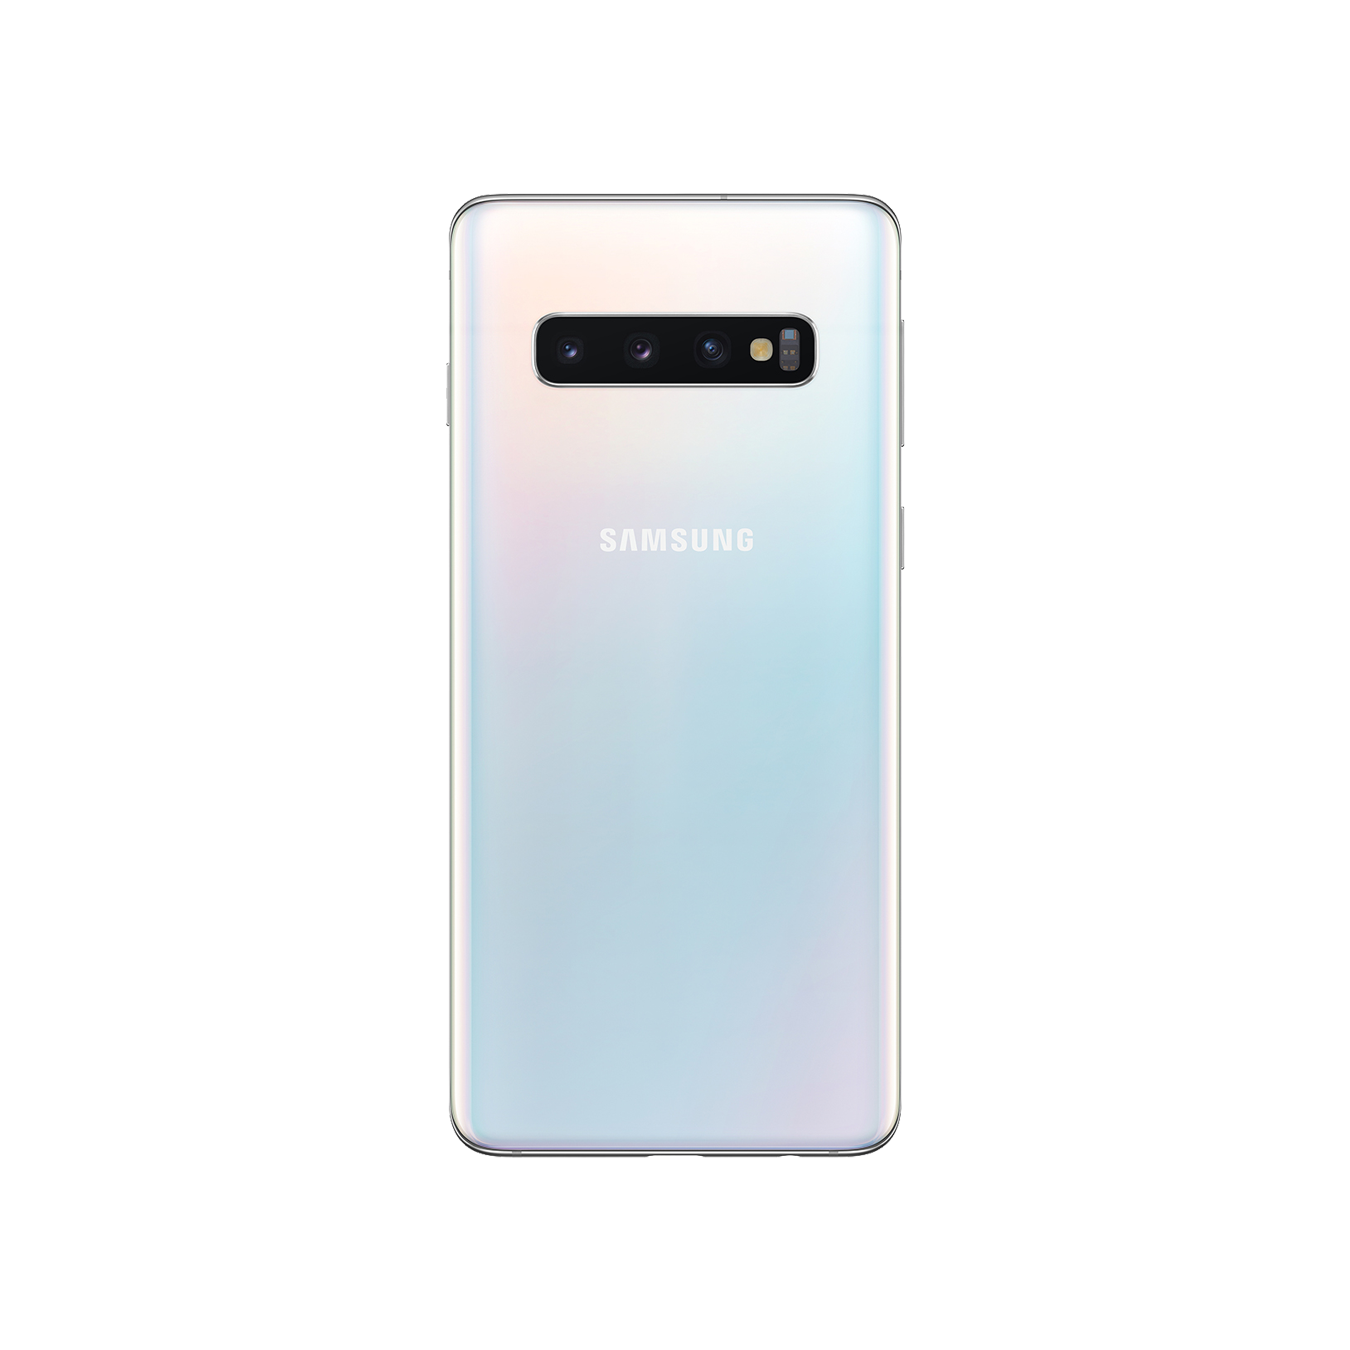 Samsung Galaxy S10 Plus network unlock, remove SIM restrictions for global use, available at cleanimei.com